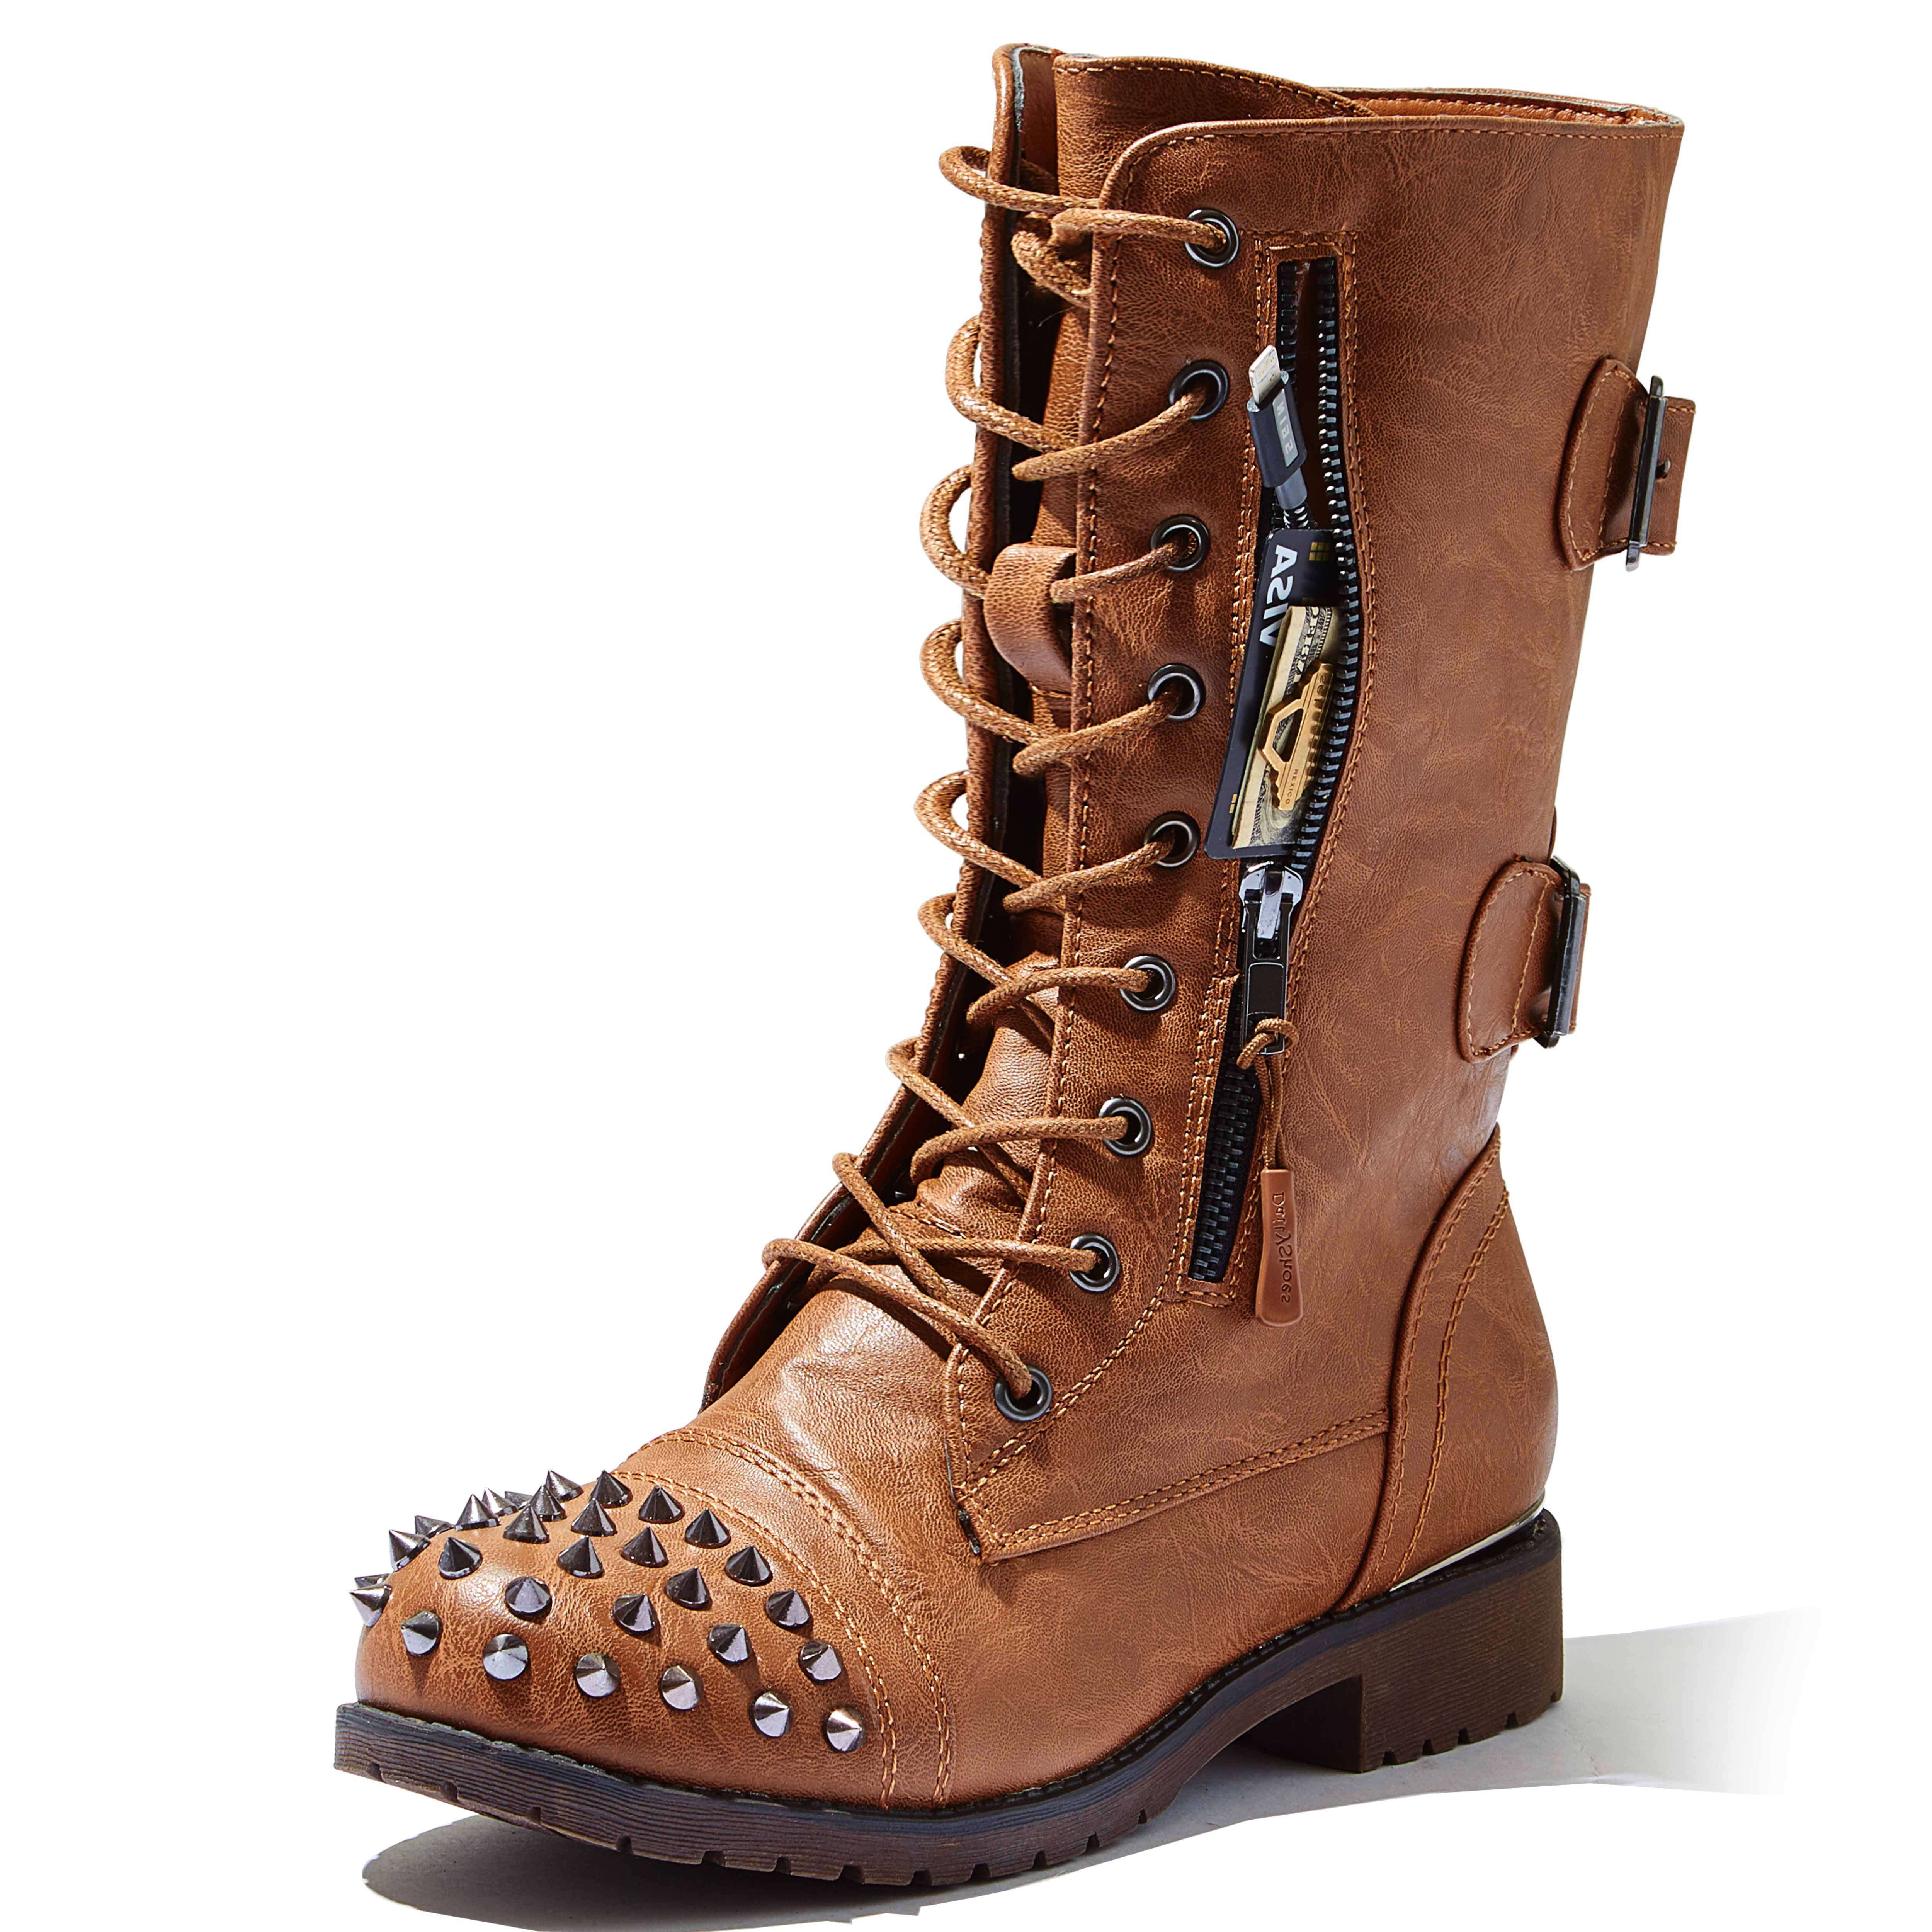 New Women Hidden Wedge Boots With Golden Zipper Fashion Ankle Tow Side Buckle